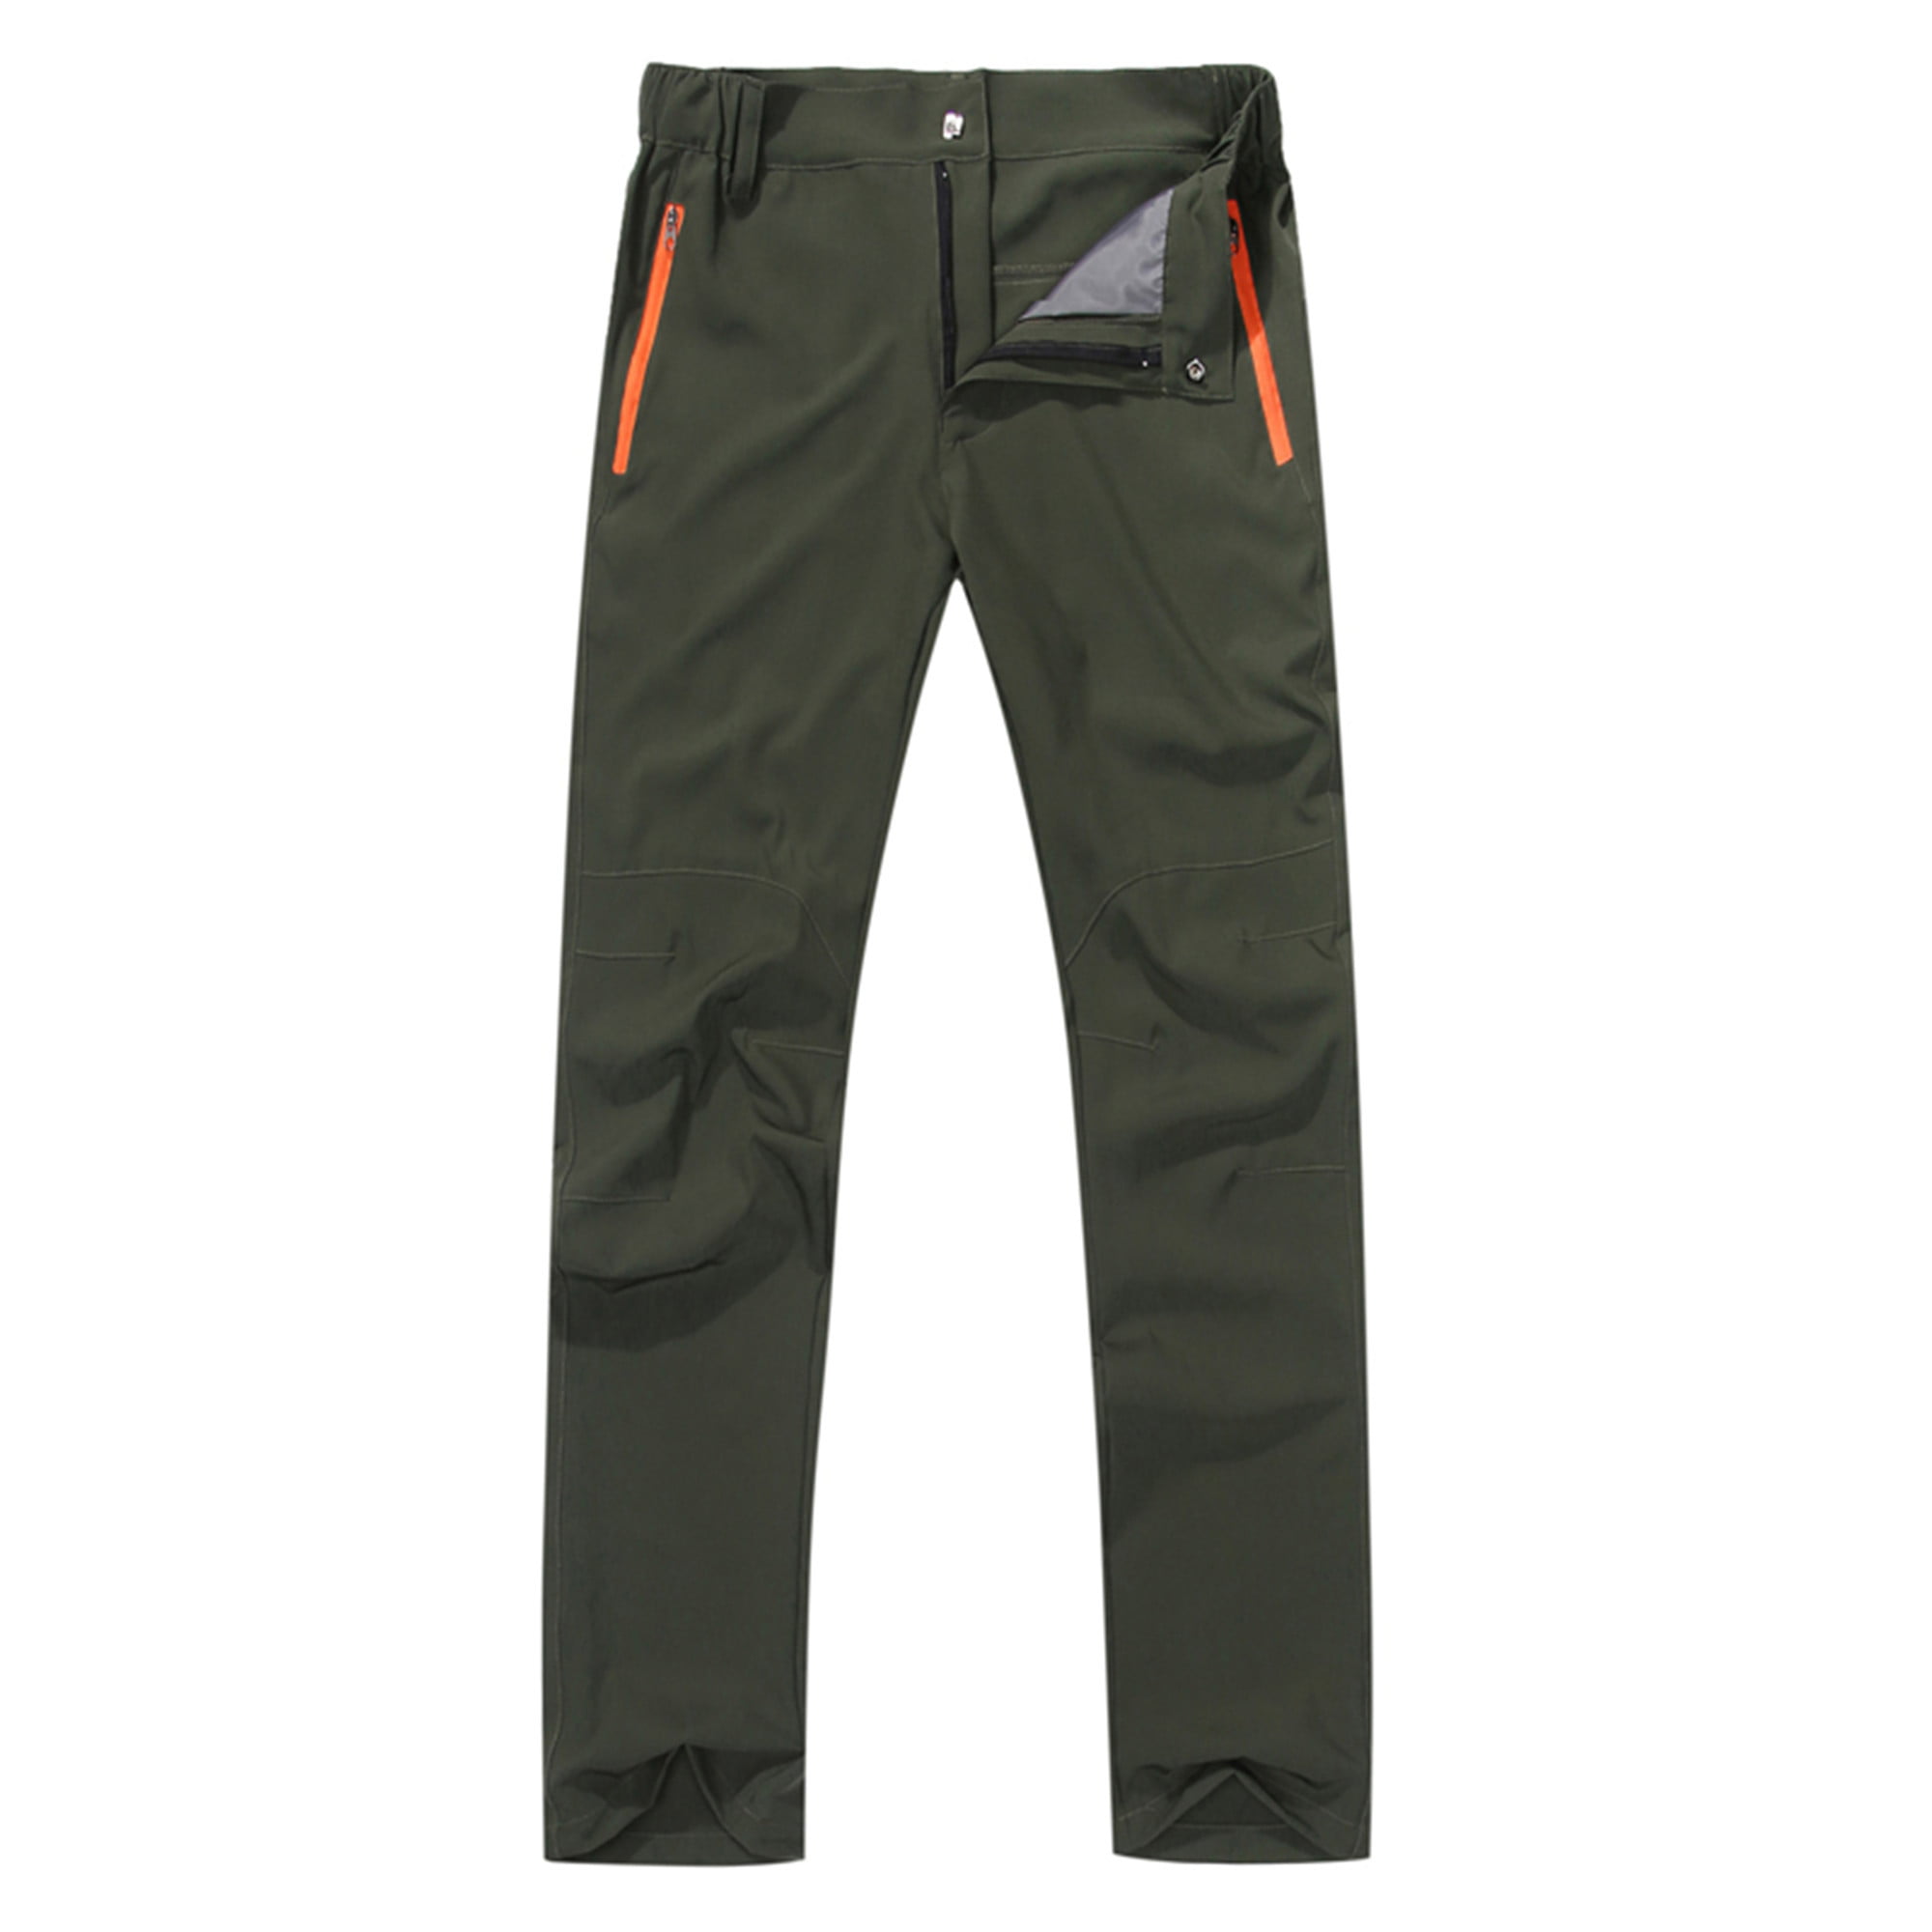 Tactical Trousers Soldier Fishing Men's Cargo Hiking Casual Pants Combat Outdoor 